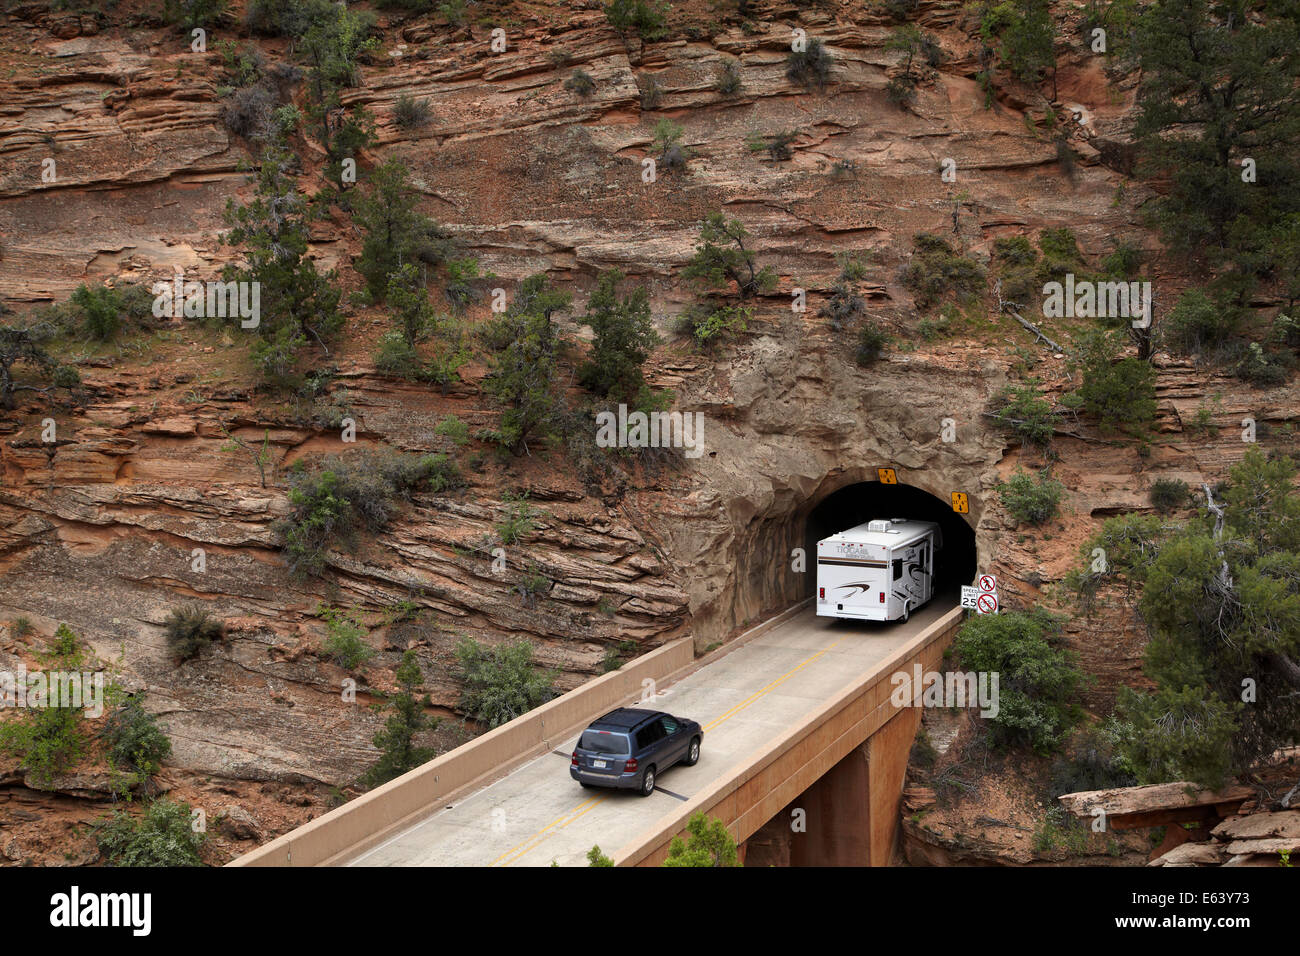 RV entering east portal of Zion Tunnel, Zion – Mount Carmel Highway, Zion National Park, Utah, USA Stock Photo